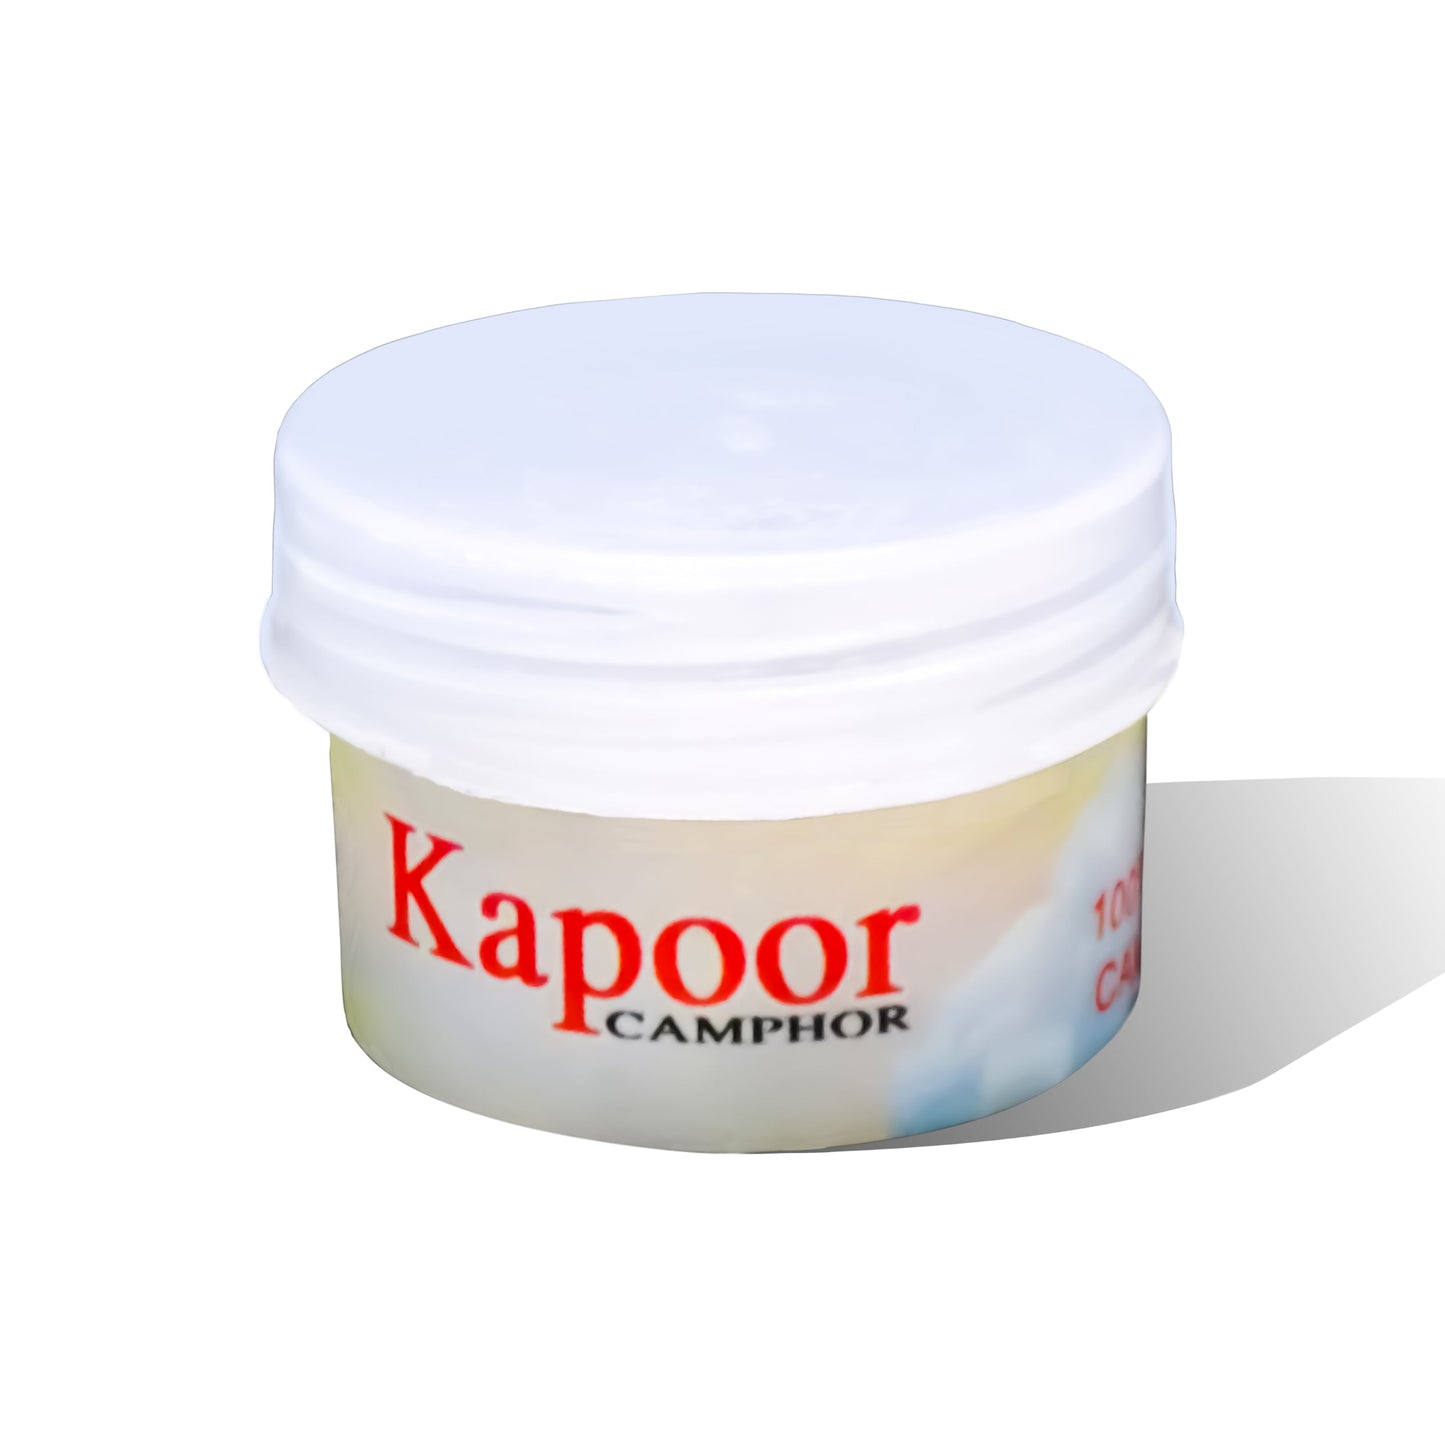 2106 Pure Kapoor Tablets for Diffuser Puja Meditation (10gm) - SWASTIK CREATIONS The Trend Point SWASTIK CREATIONS The Trend Point